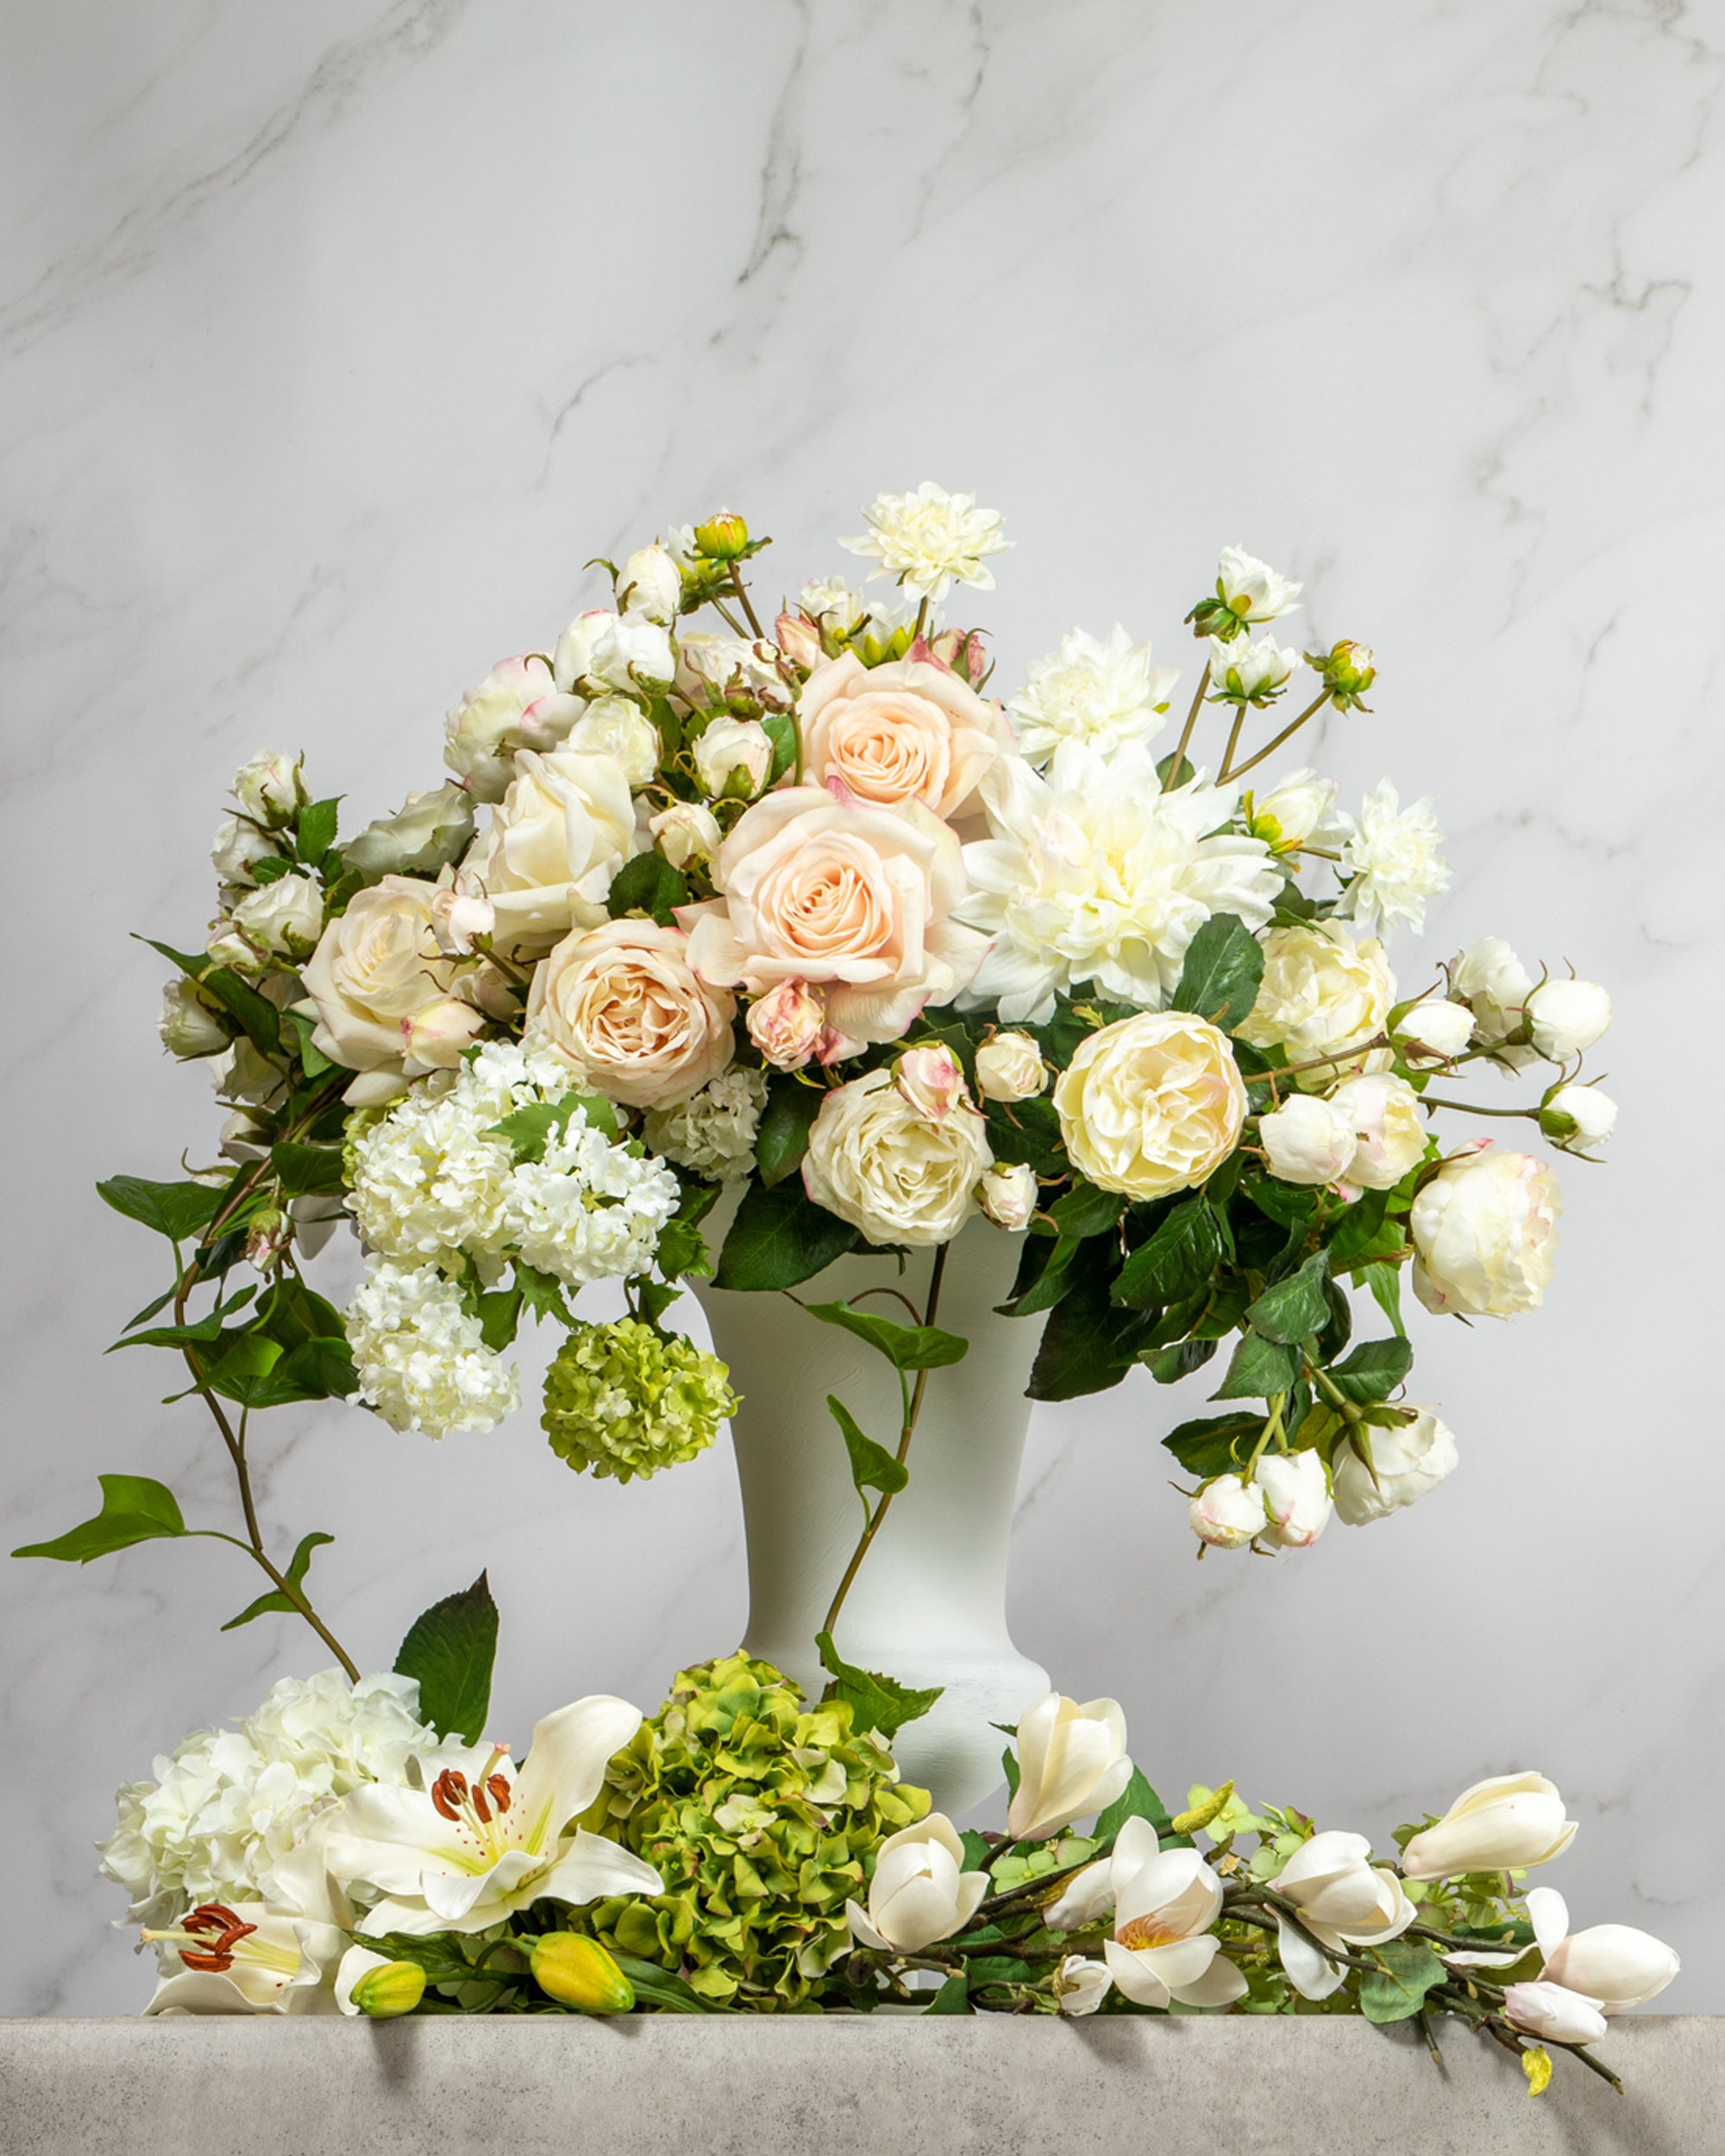 Prestige Botanicals Artificial Flowers for Weddings in a large white vase